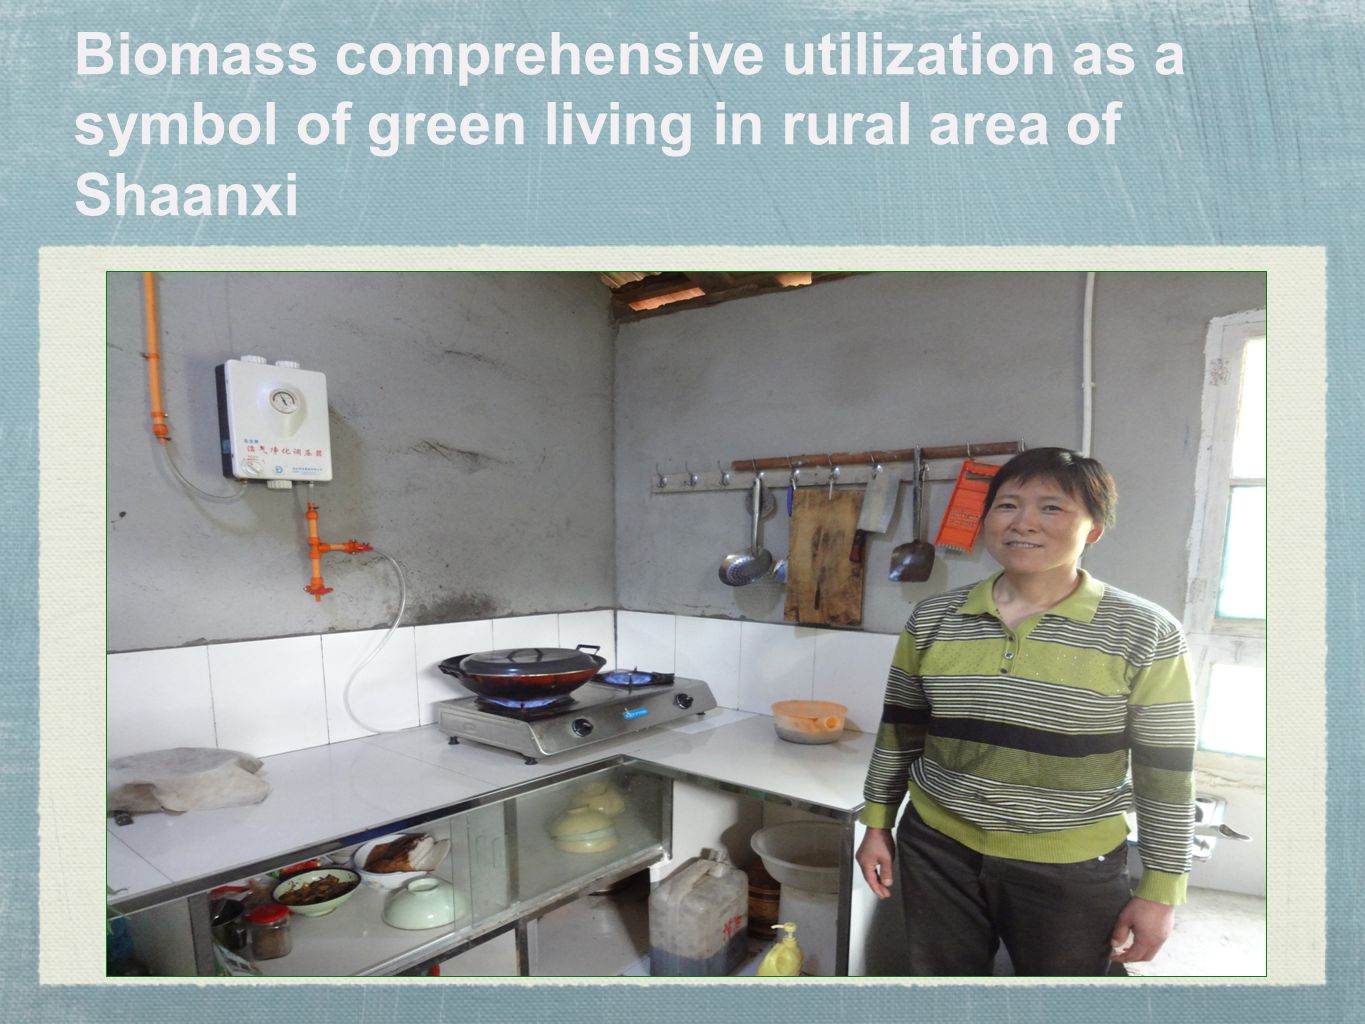 Biomass comprehensive utilization as a symbol of green living in rural area of Shaanxi